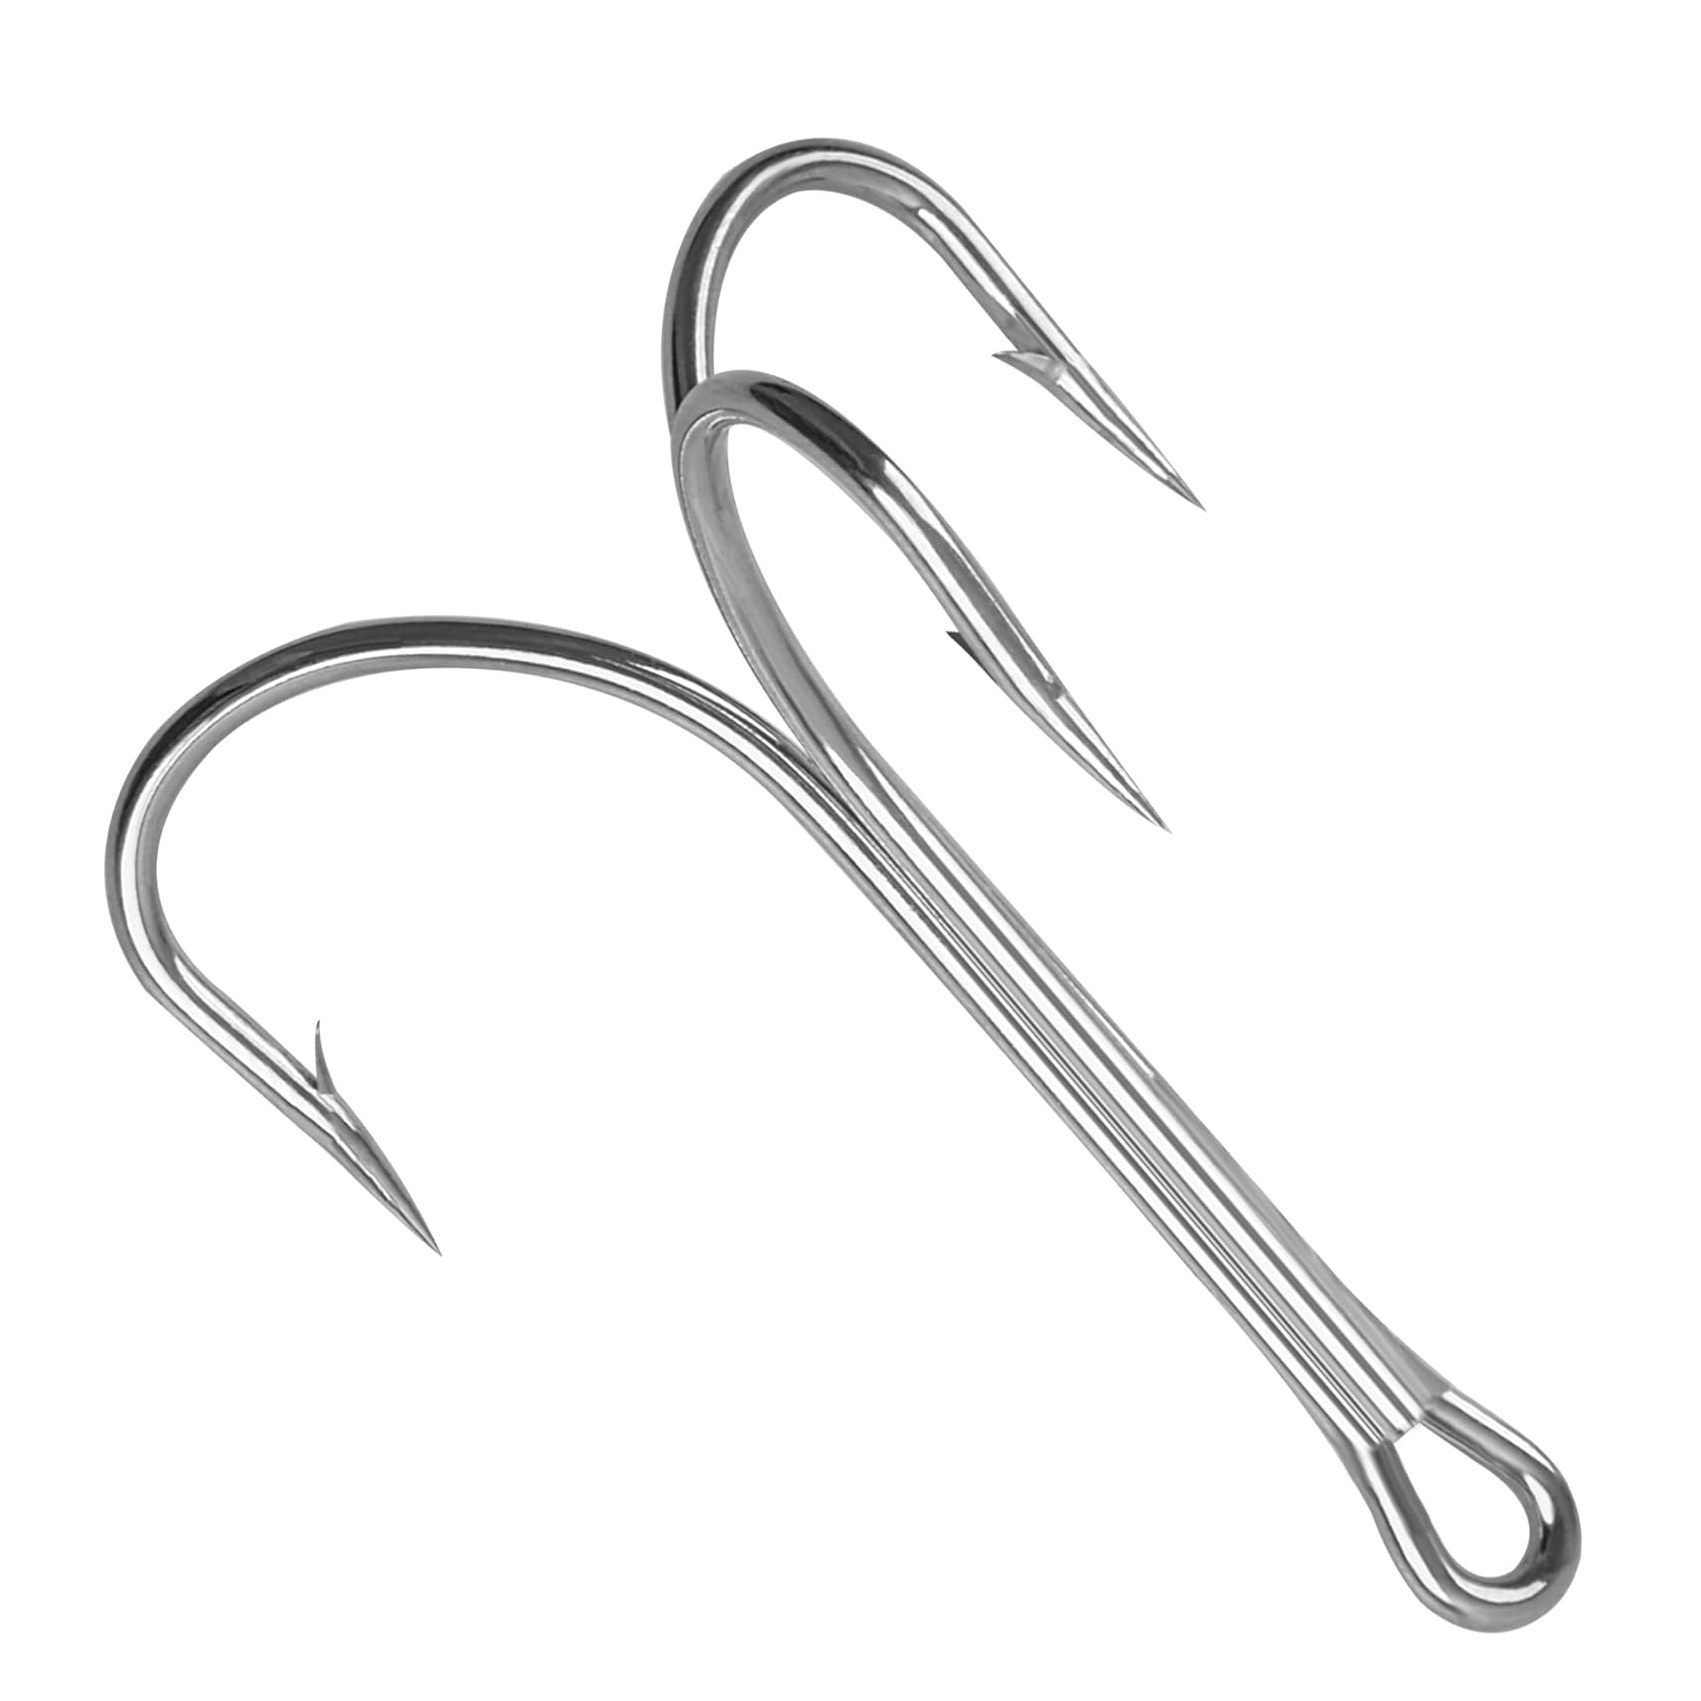 Cheap Steel Saltwater High Strength Barbed Fishing Hooks Long